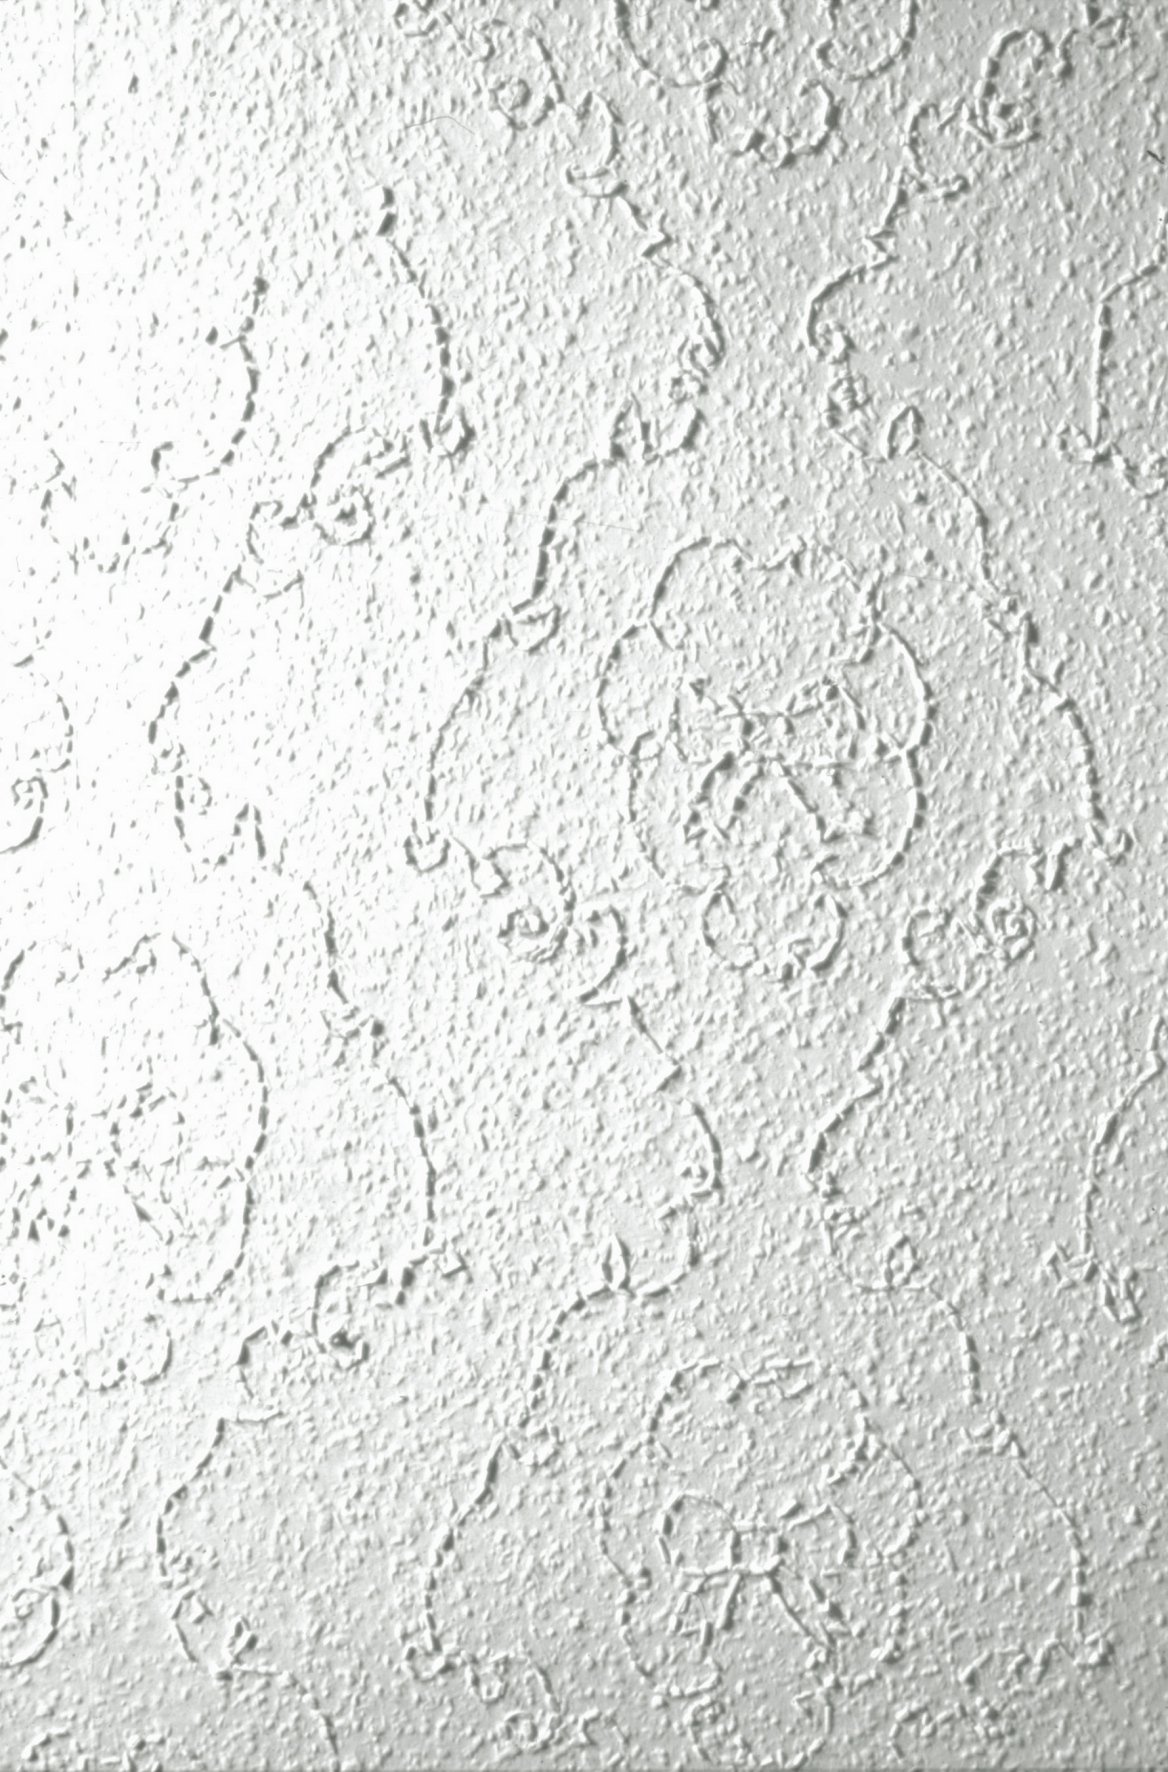 Woodchip (1999) wallpaper, chippings, emulsion paint.